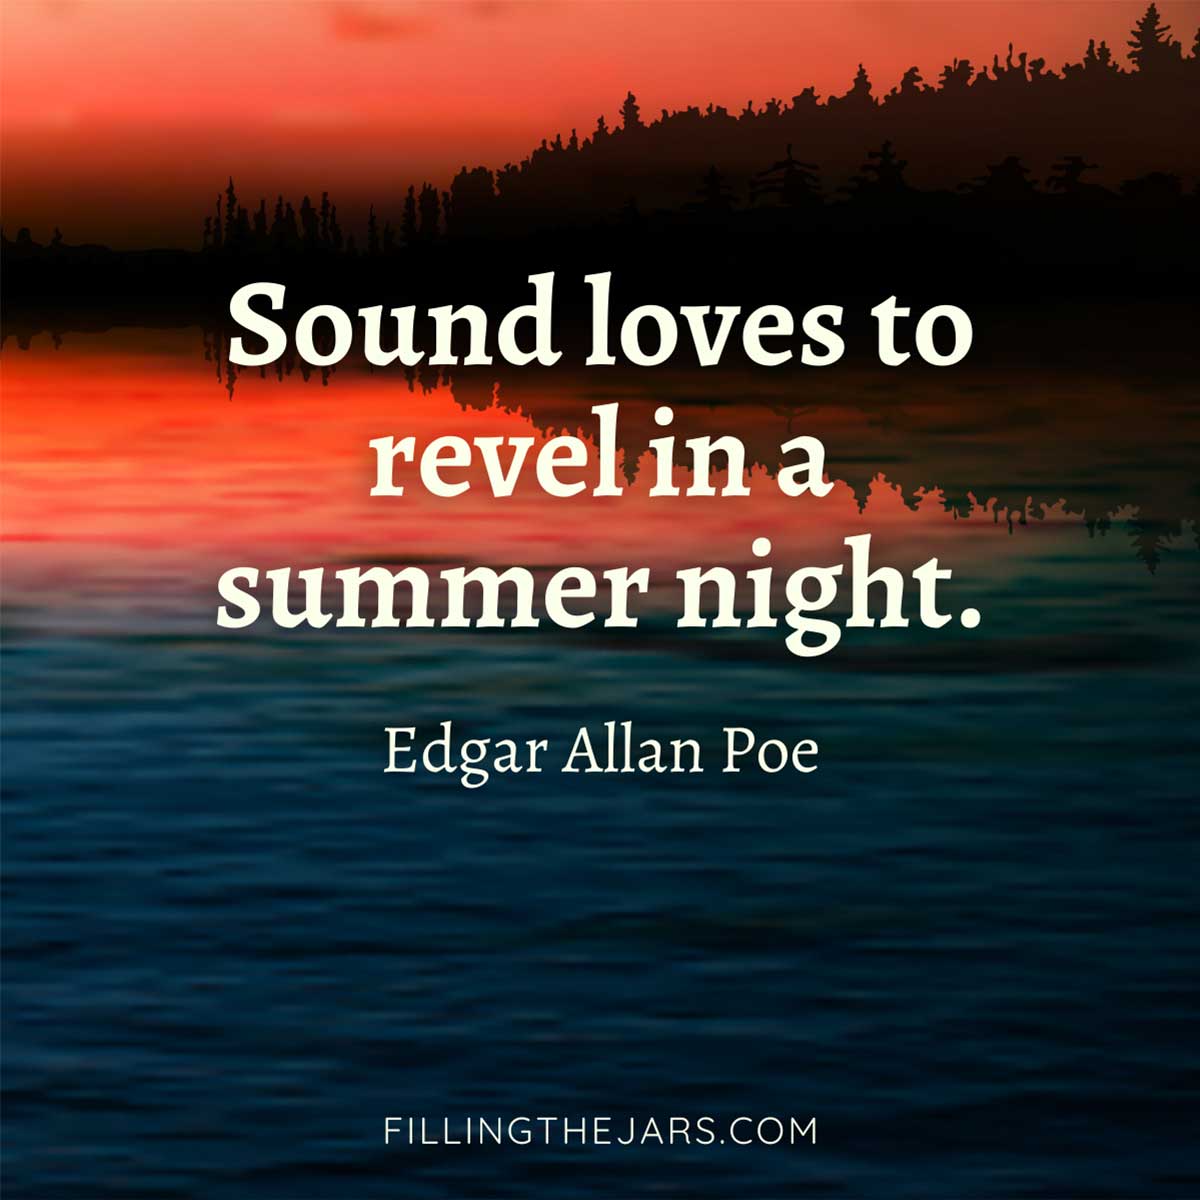 Edgar Allan Poe sound loves to revel in a summer night quote in creamy text over late summer sunset.